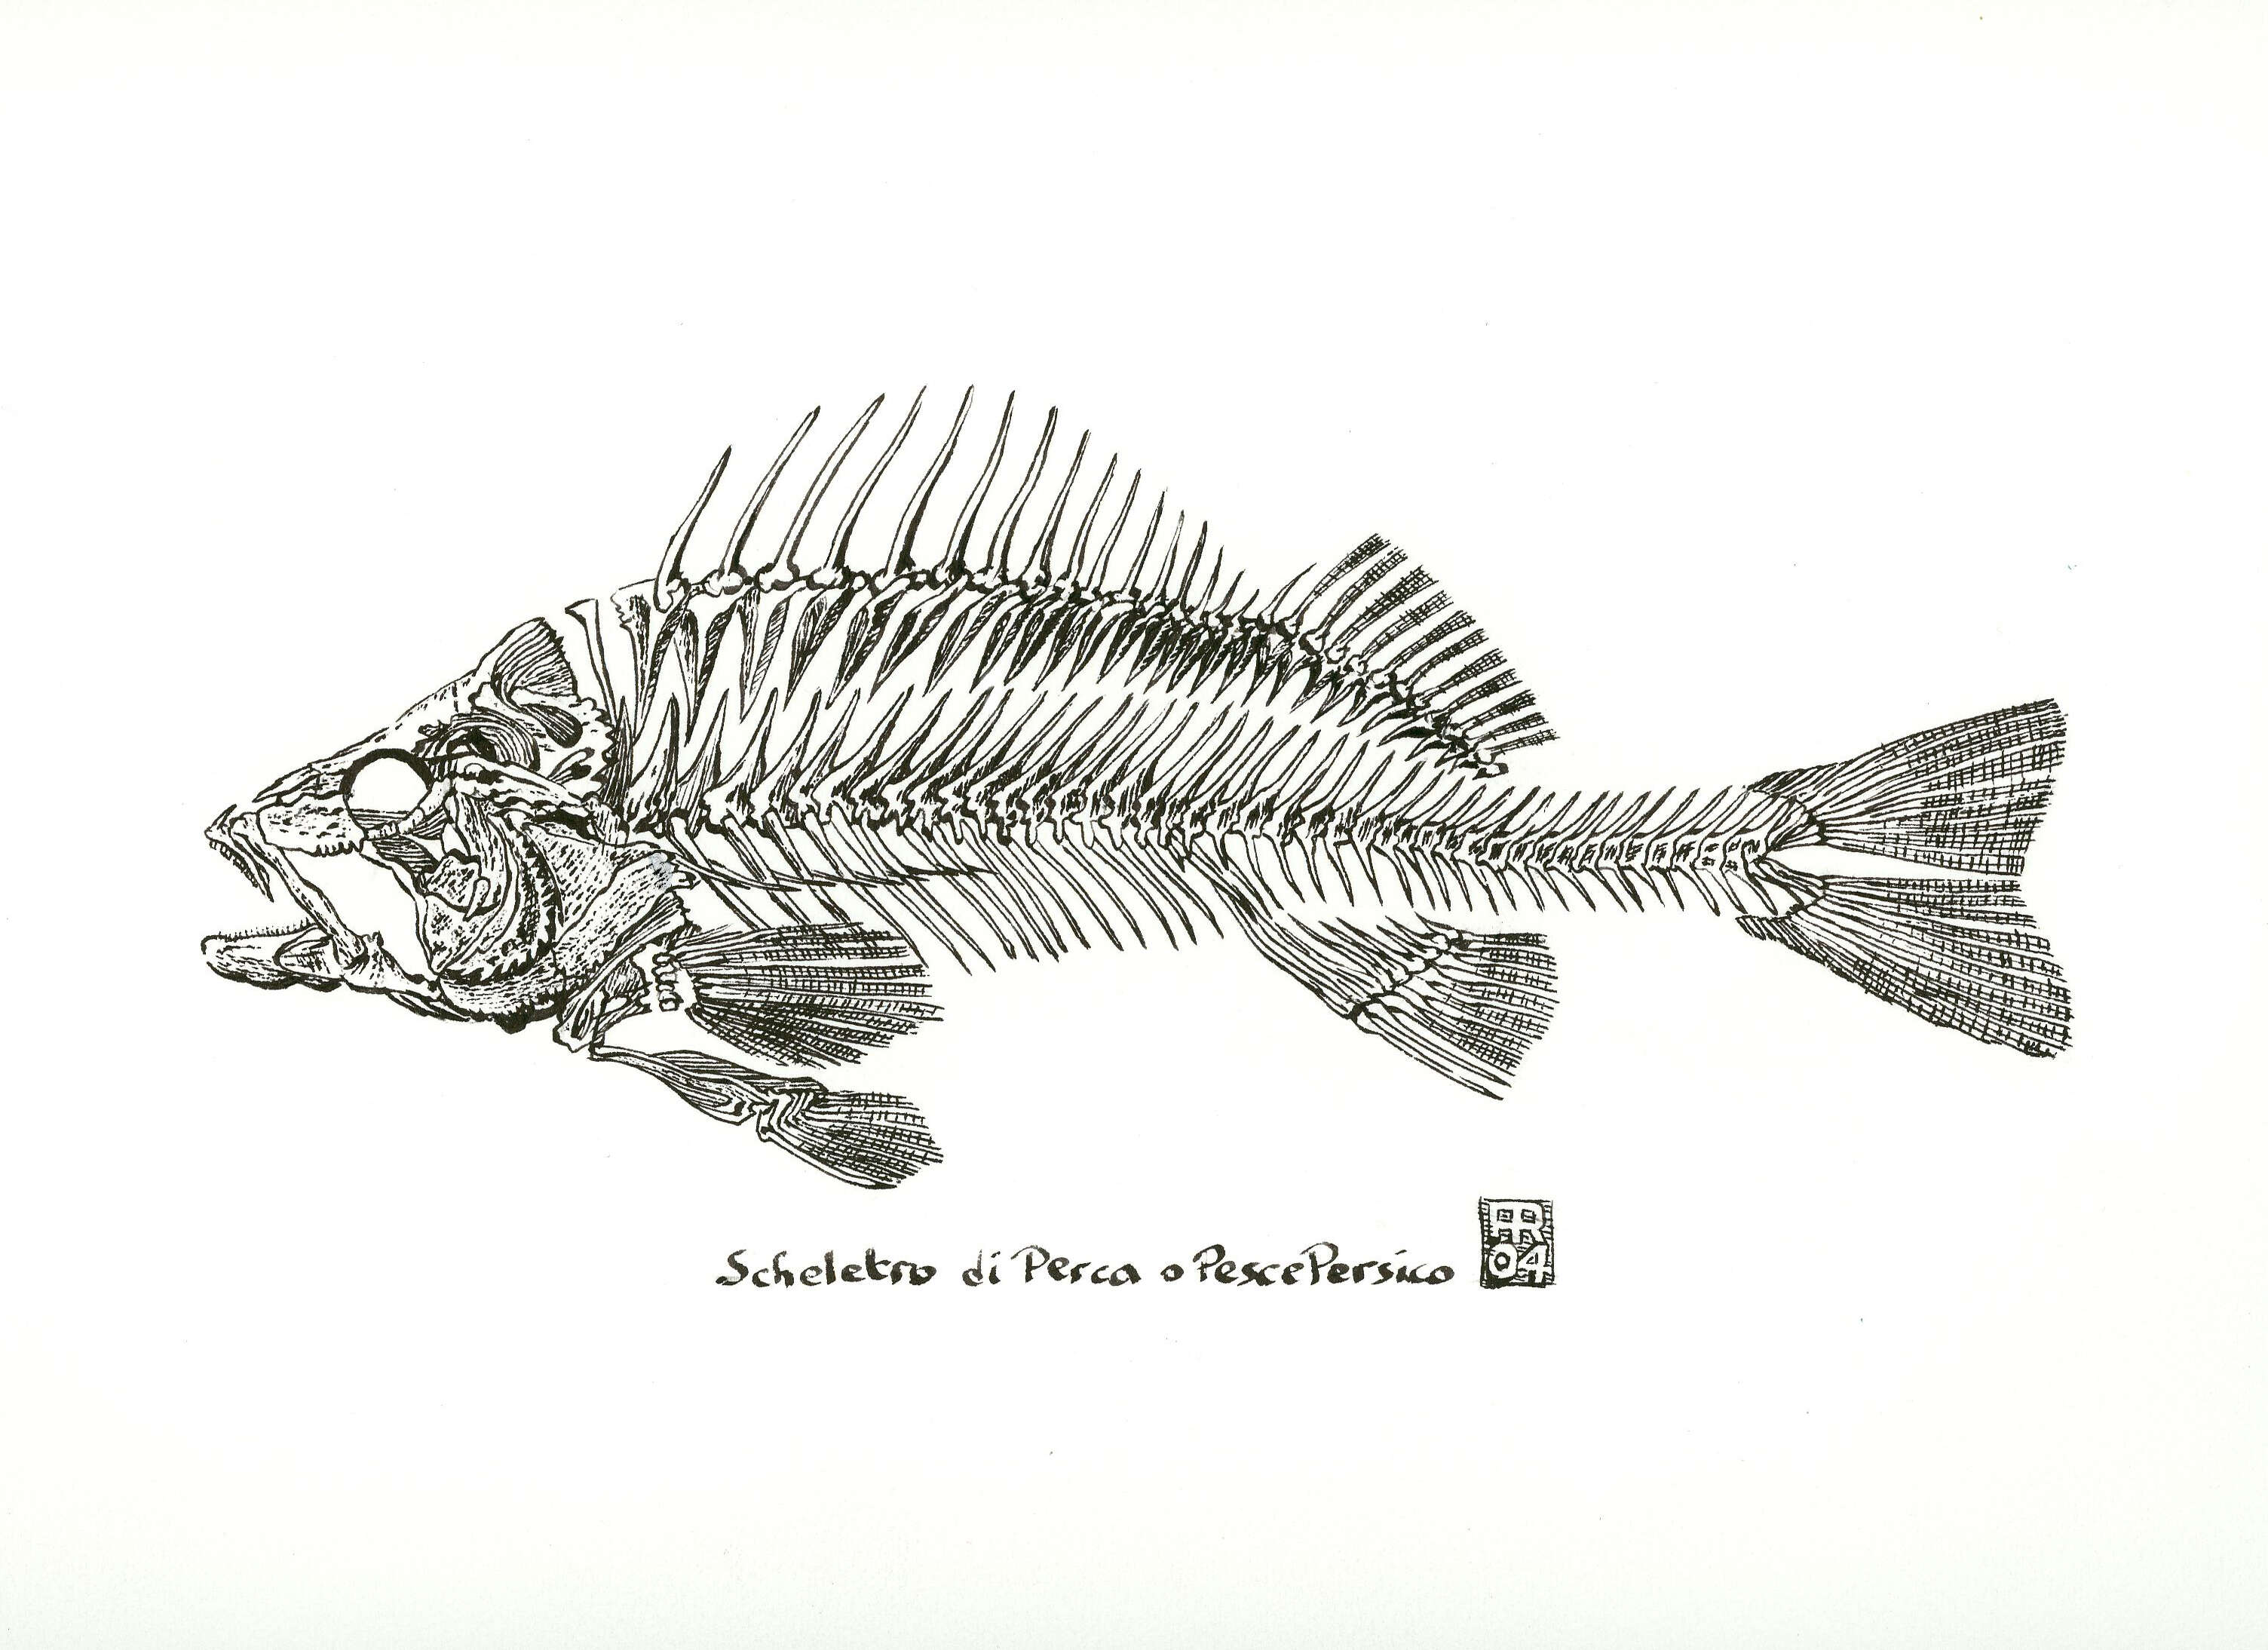 Image of Perch